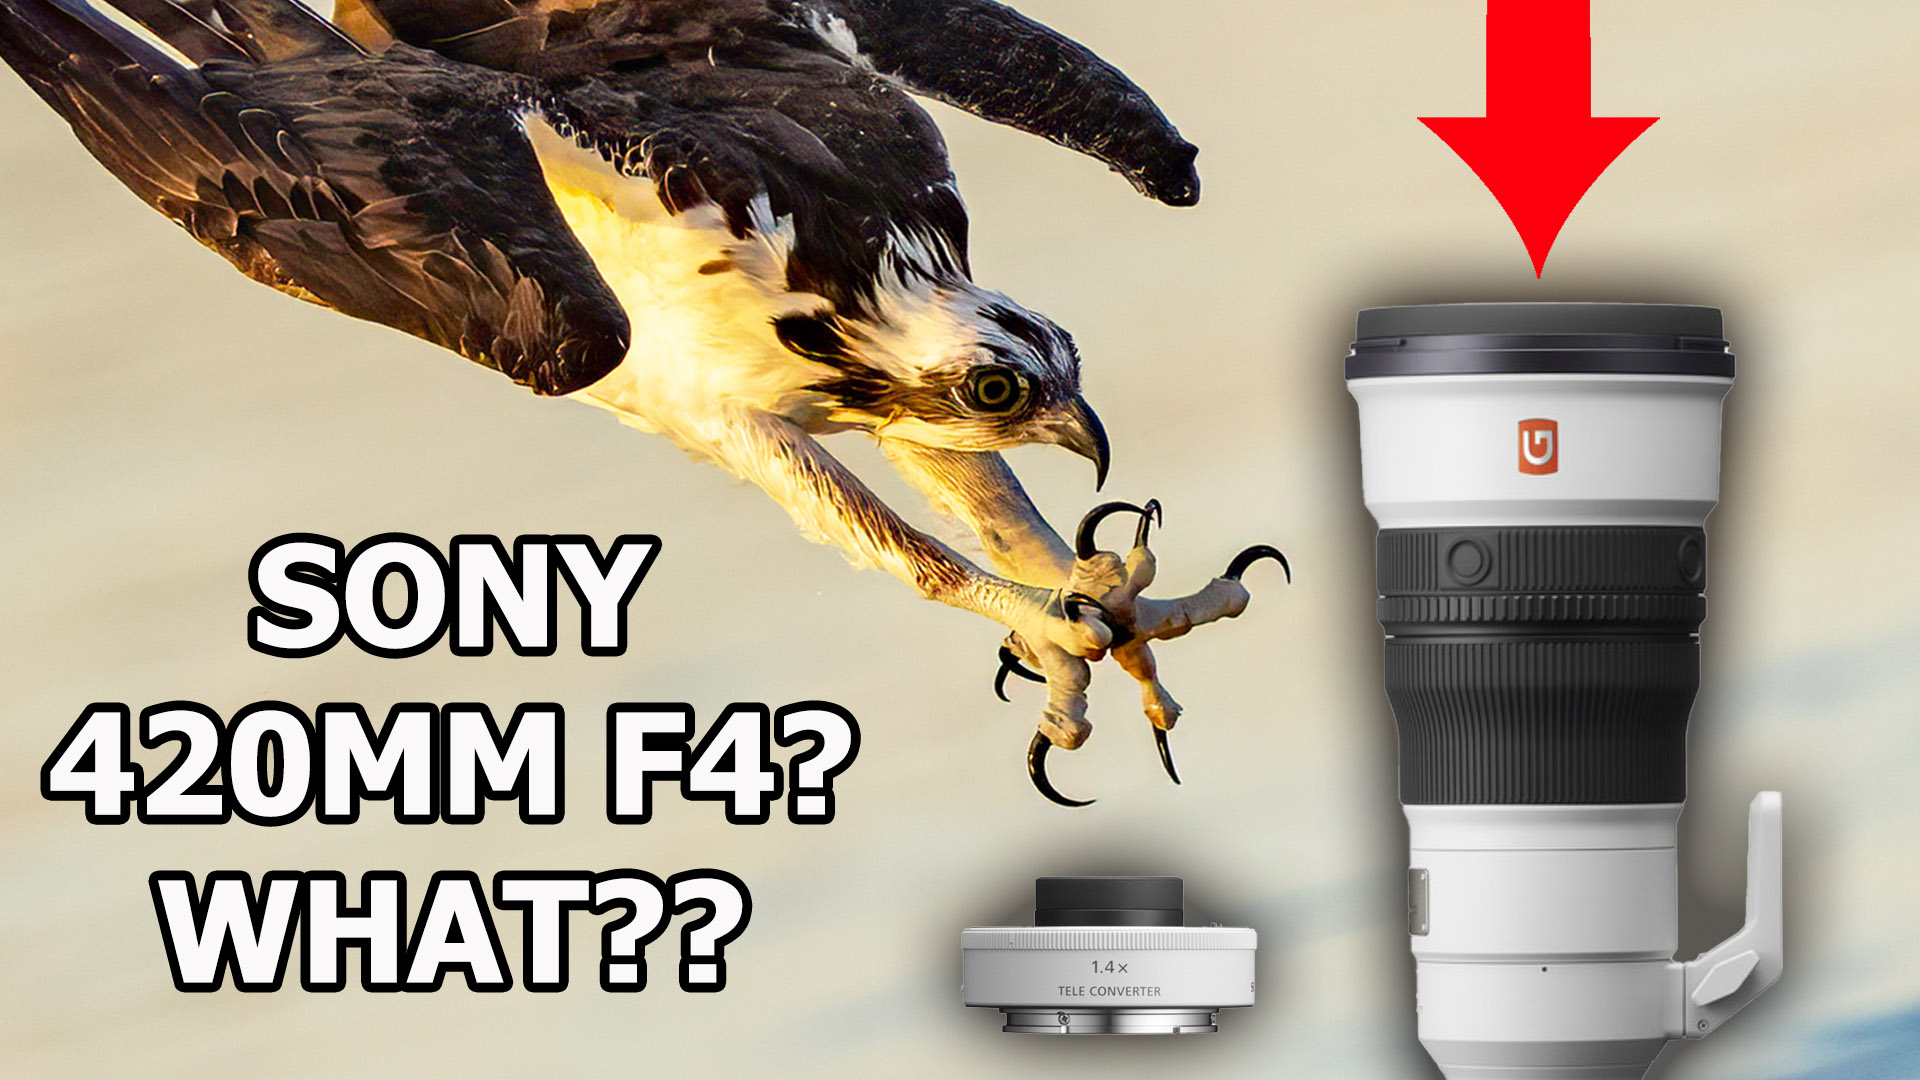 Sony 420MM F4? What???? 300mm 2.8 + 1.4 Tele – Beautiful Combo for bird and wildlife photography.